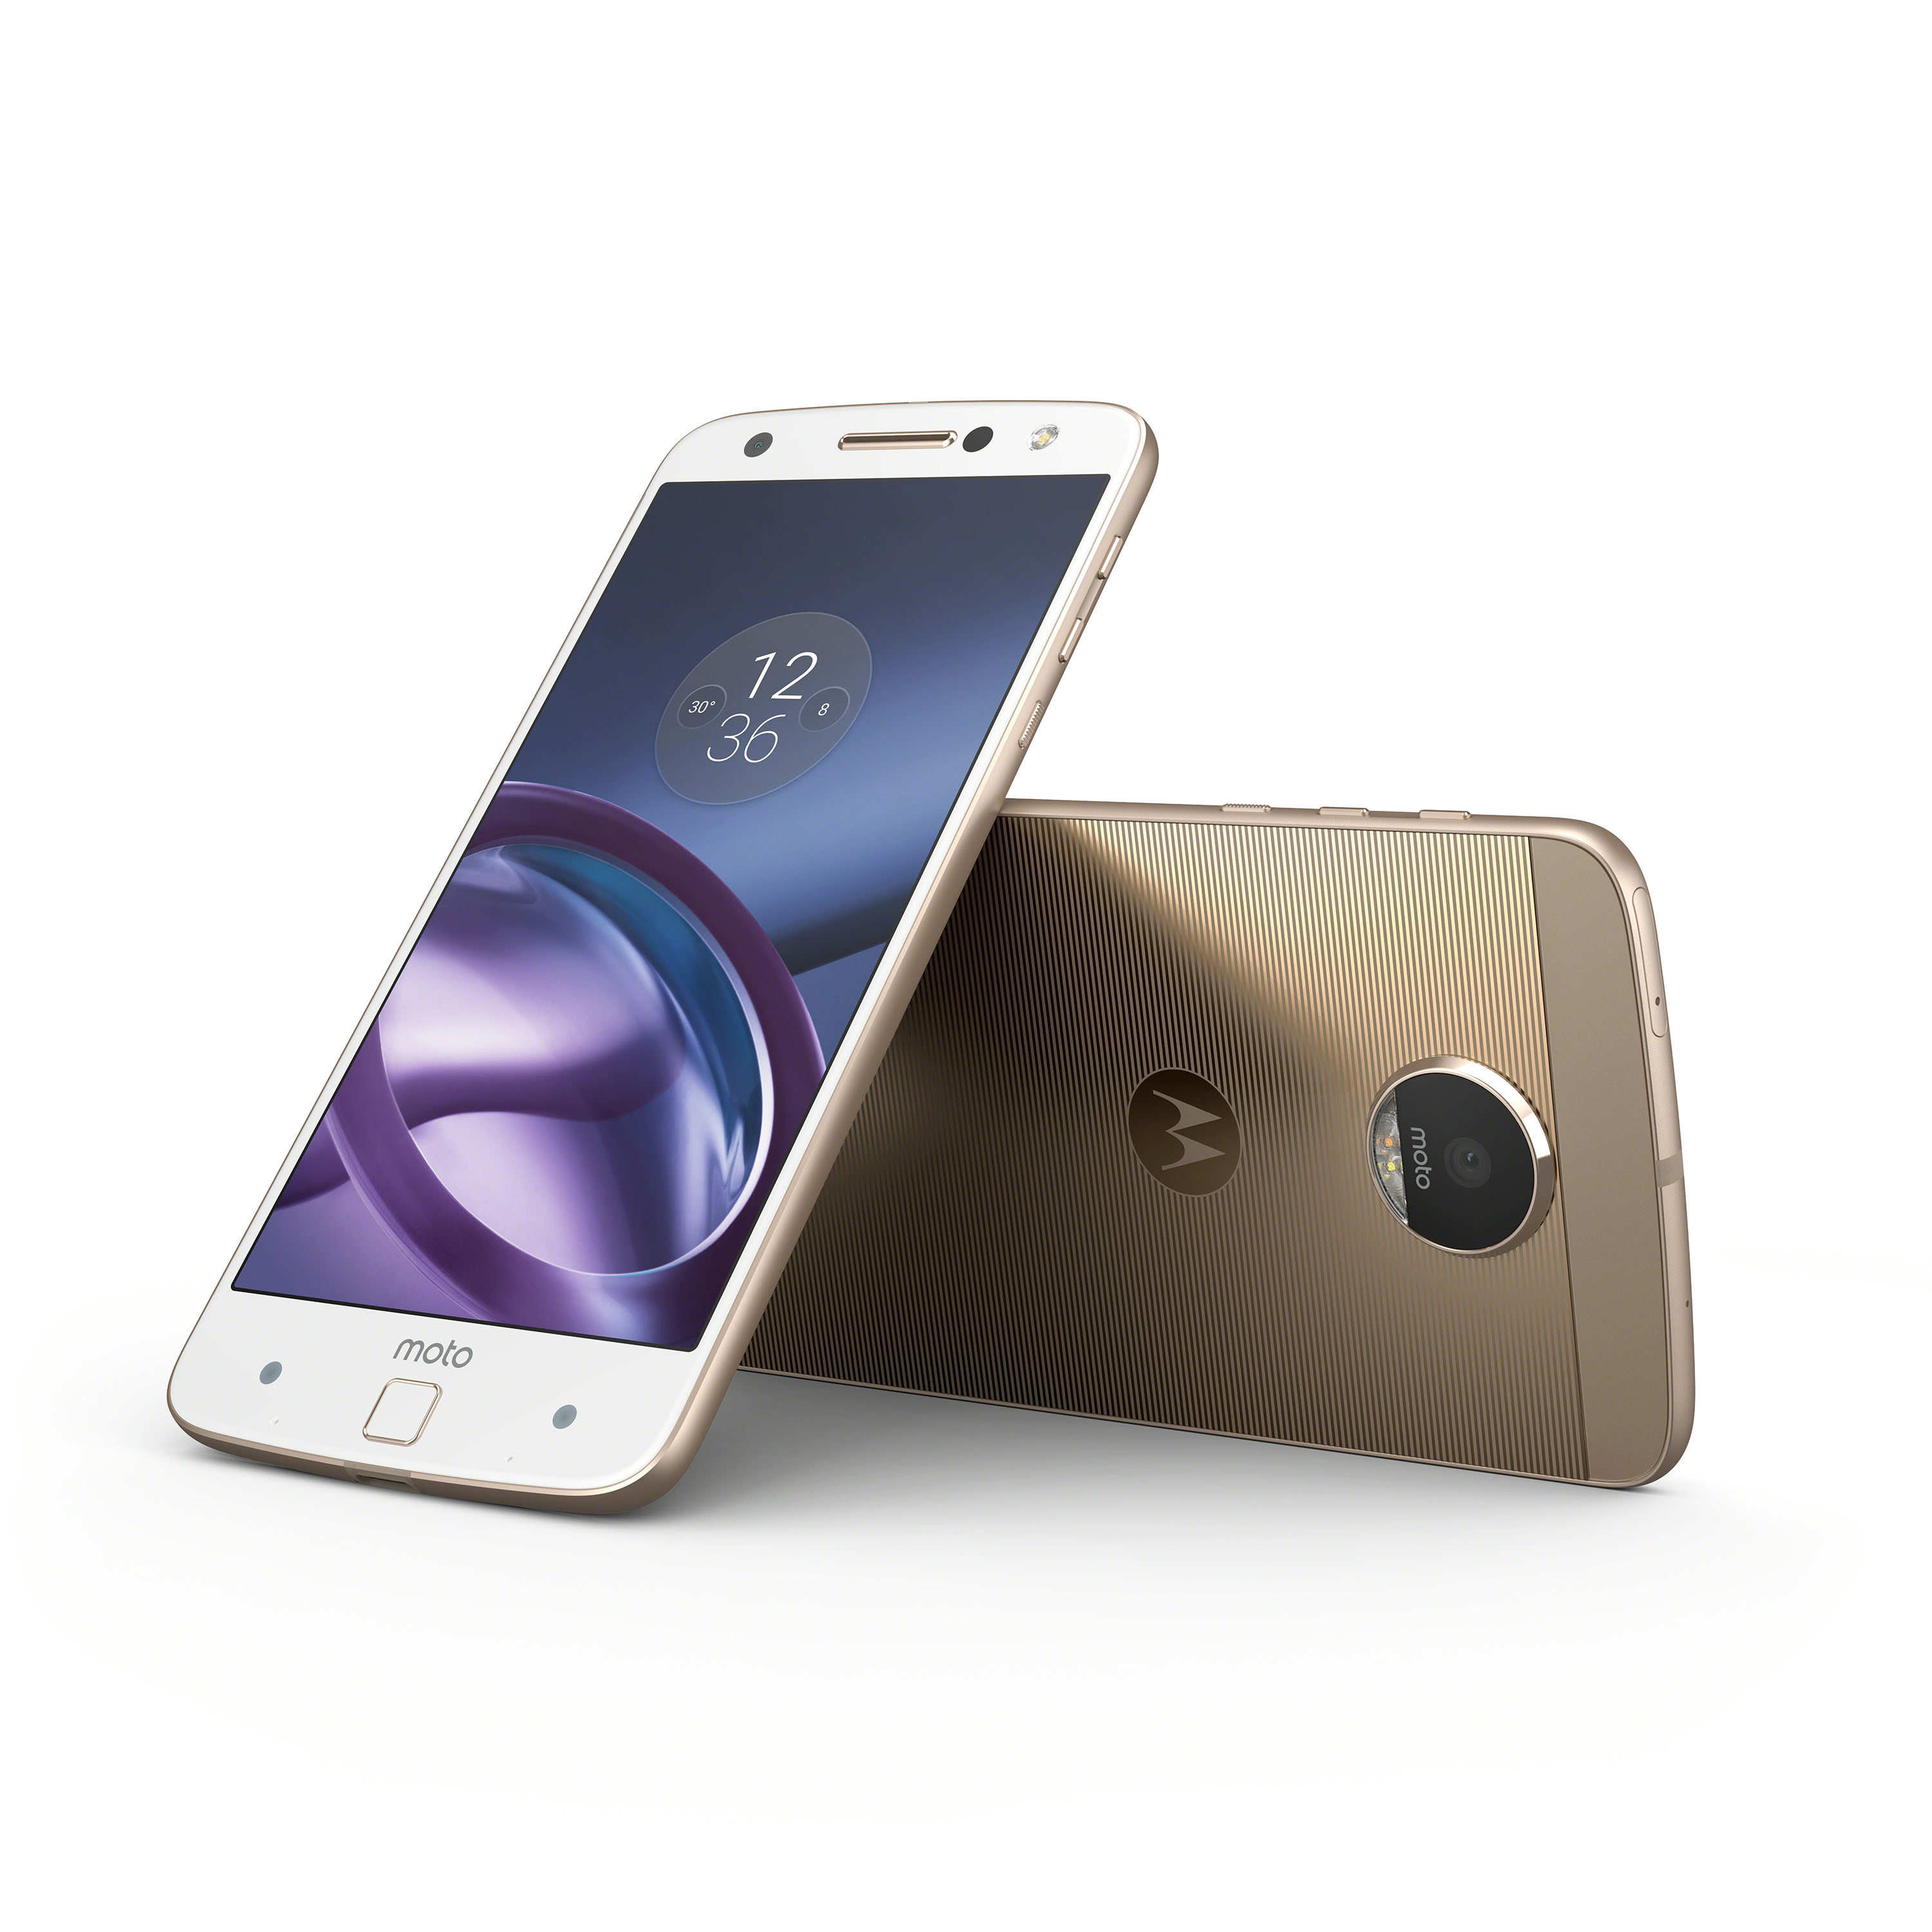 Lenovo Tech World 2016: Moto Z and Moto Z Force debut with Moto Mods